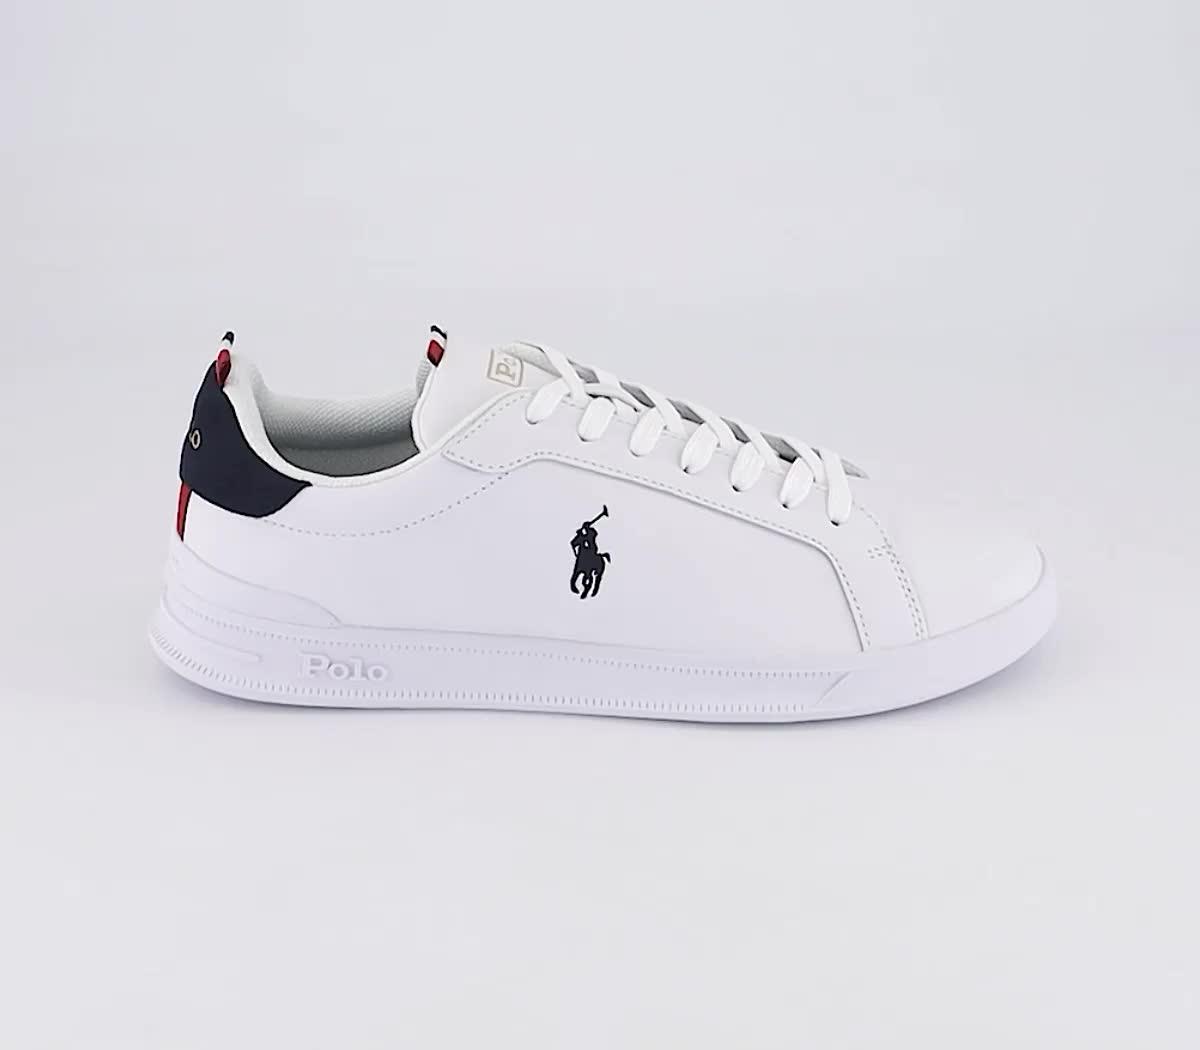 Polo Ralph Lauren Heritage Court Trainers White Navy Red - Men's Trainers